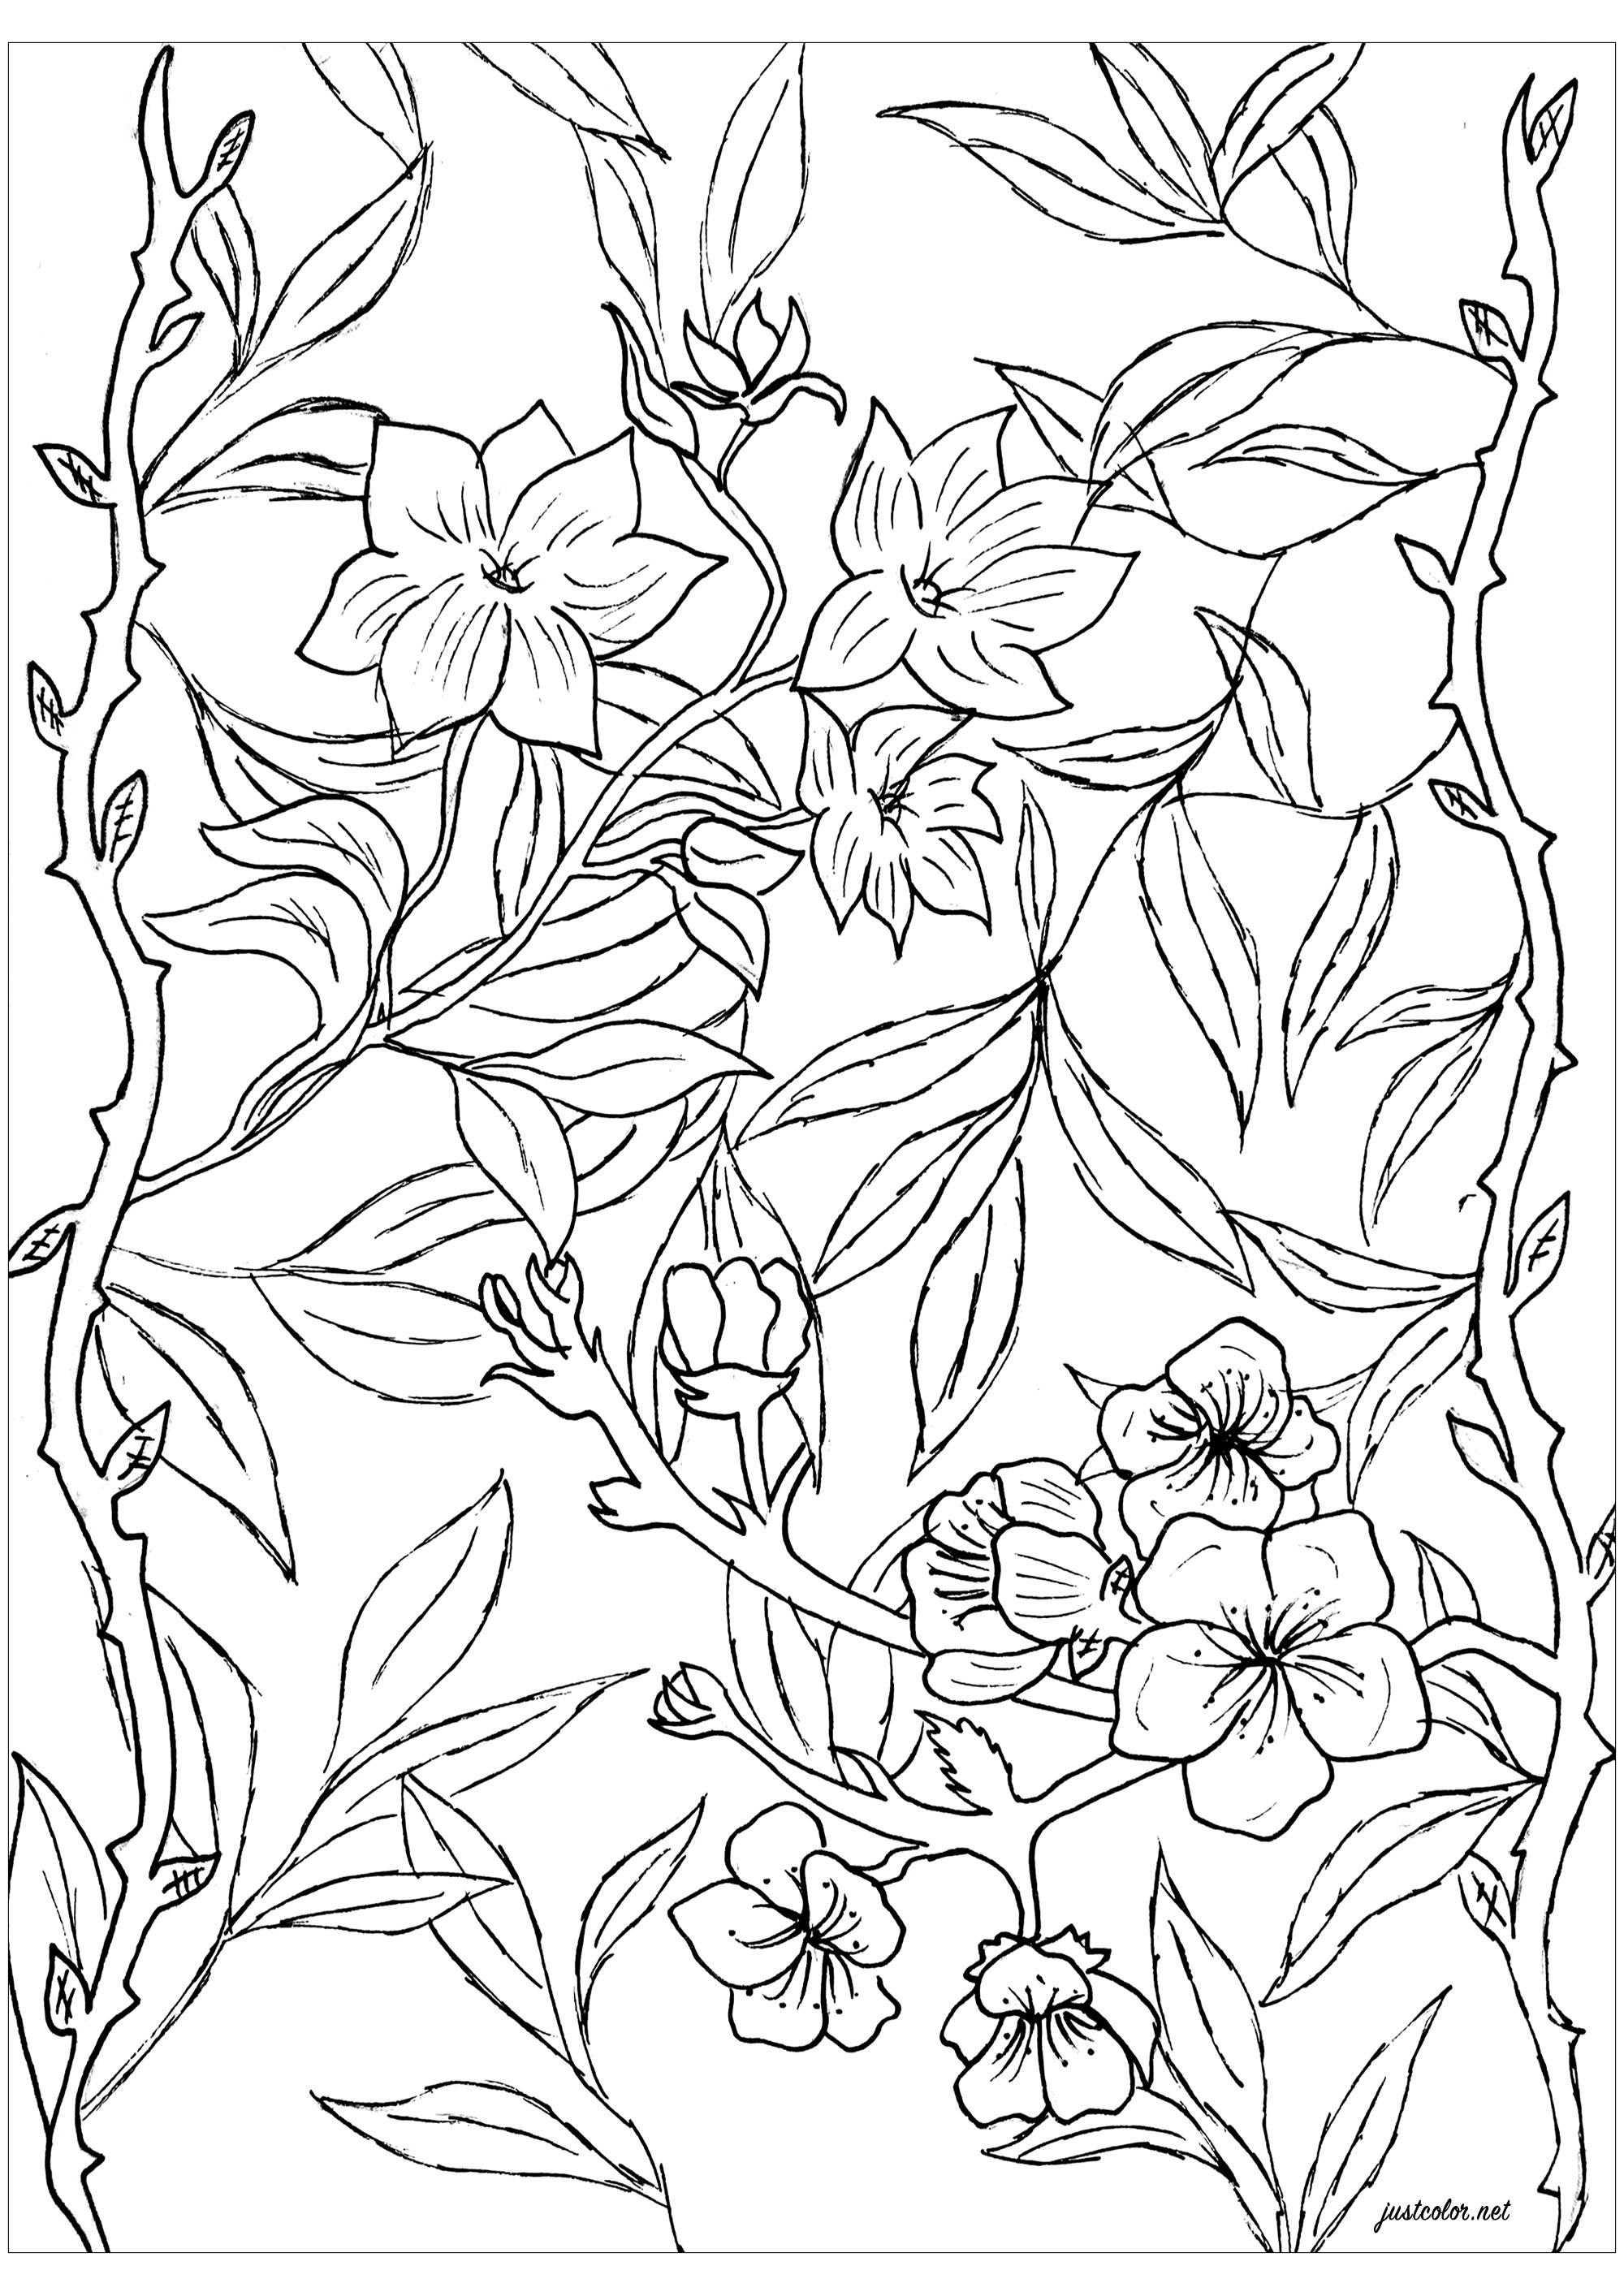 Cute flowers to color, Artist : Hanna